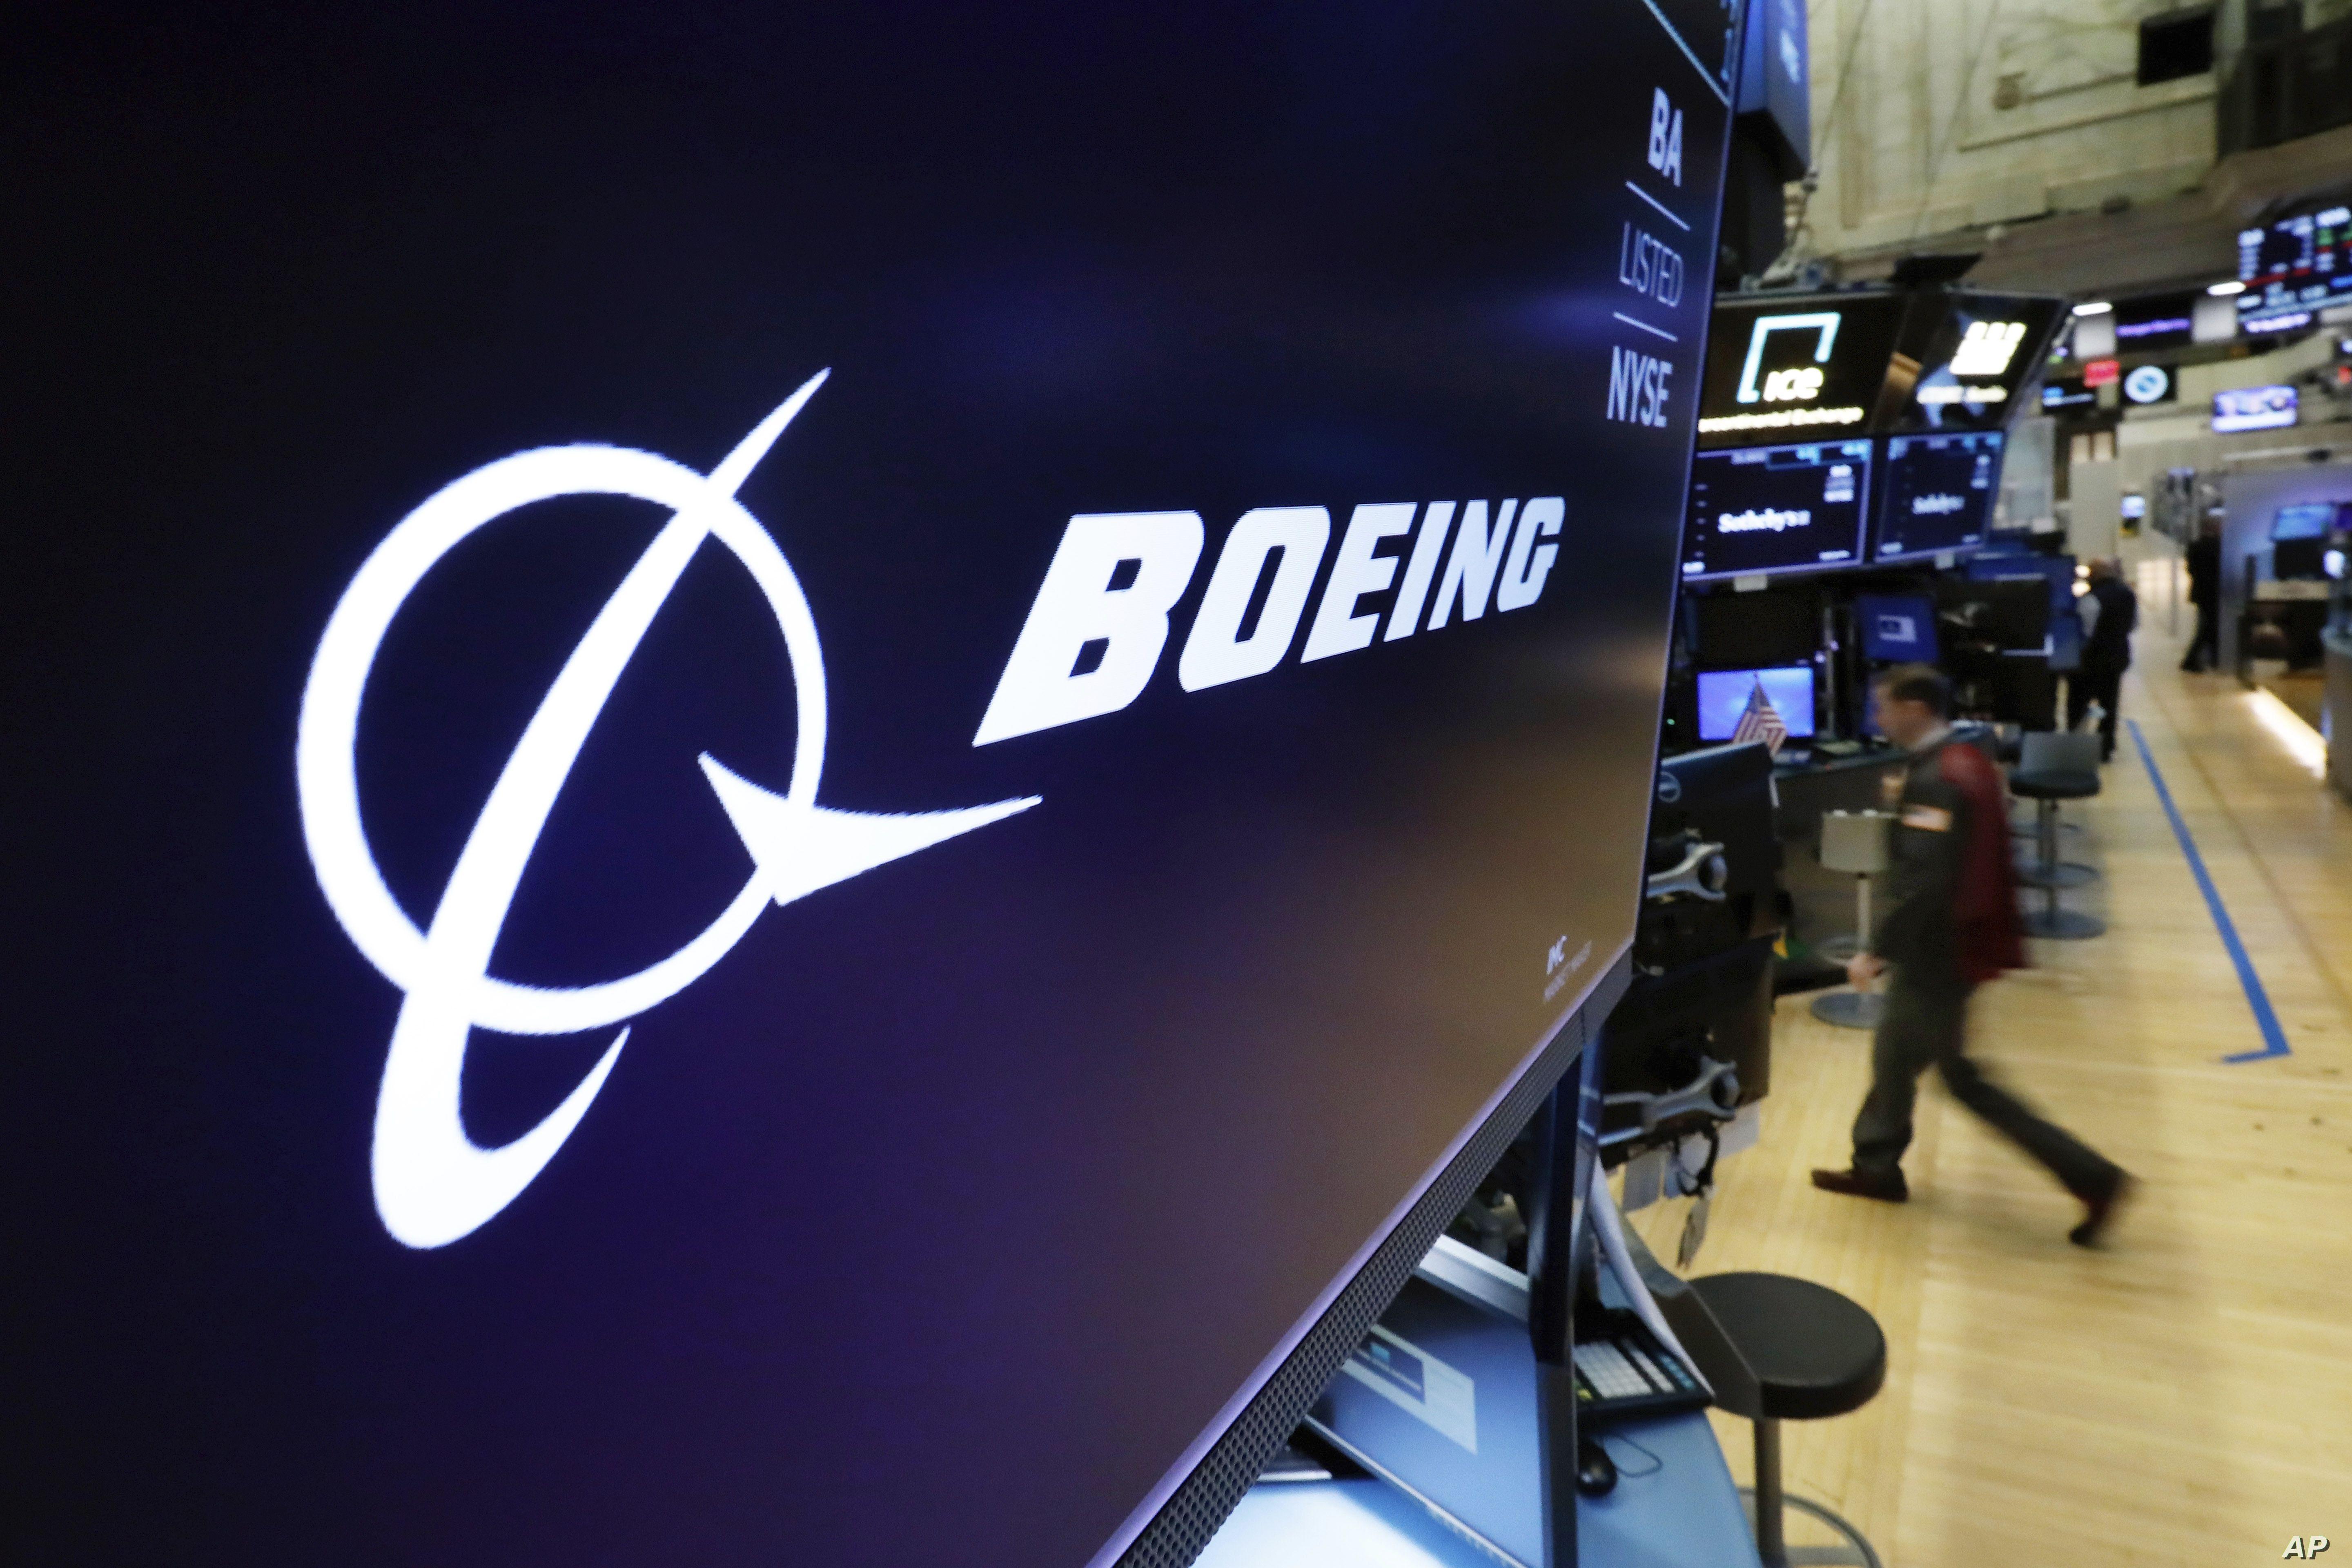 Boeing's Logo - Boeing Shares Plunge After Ethiopian Airlines Crash | Voice of ...